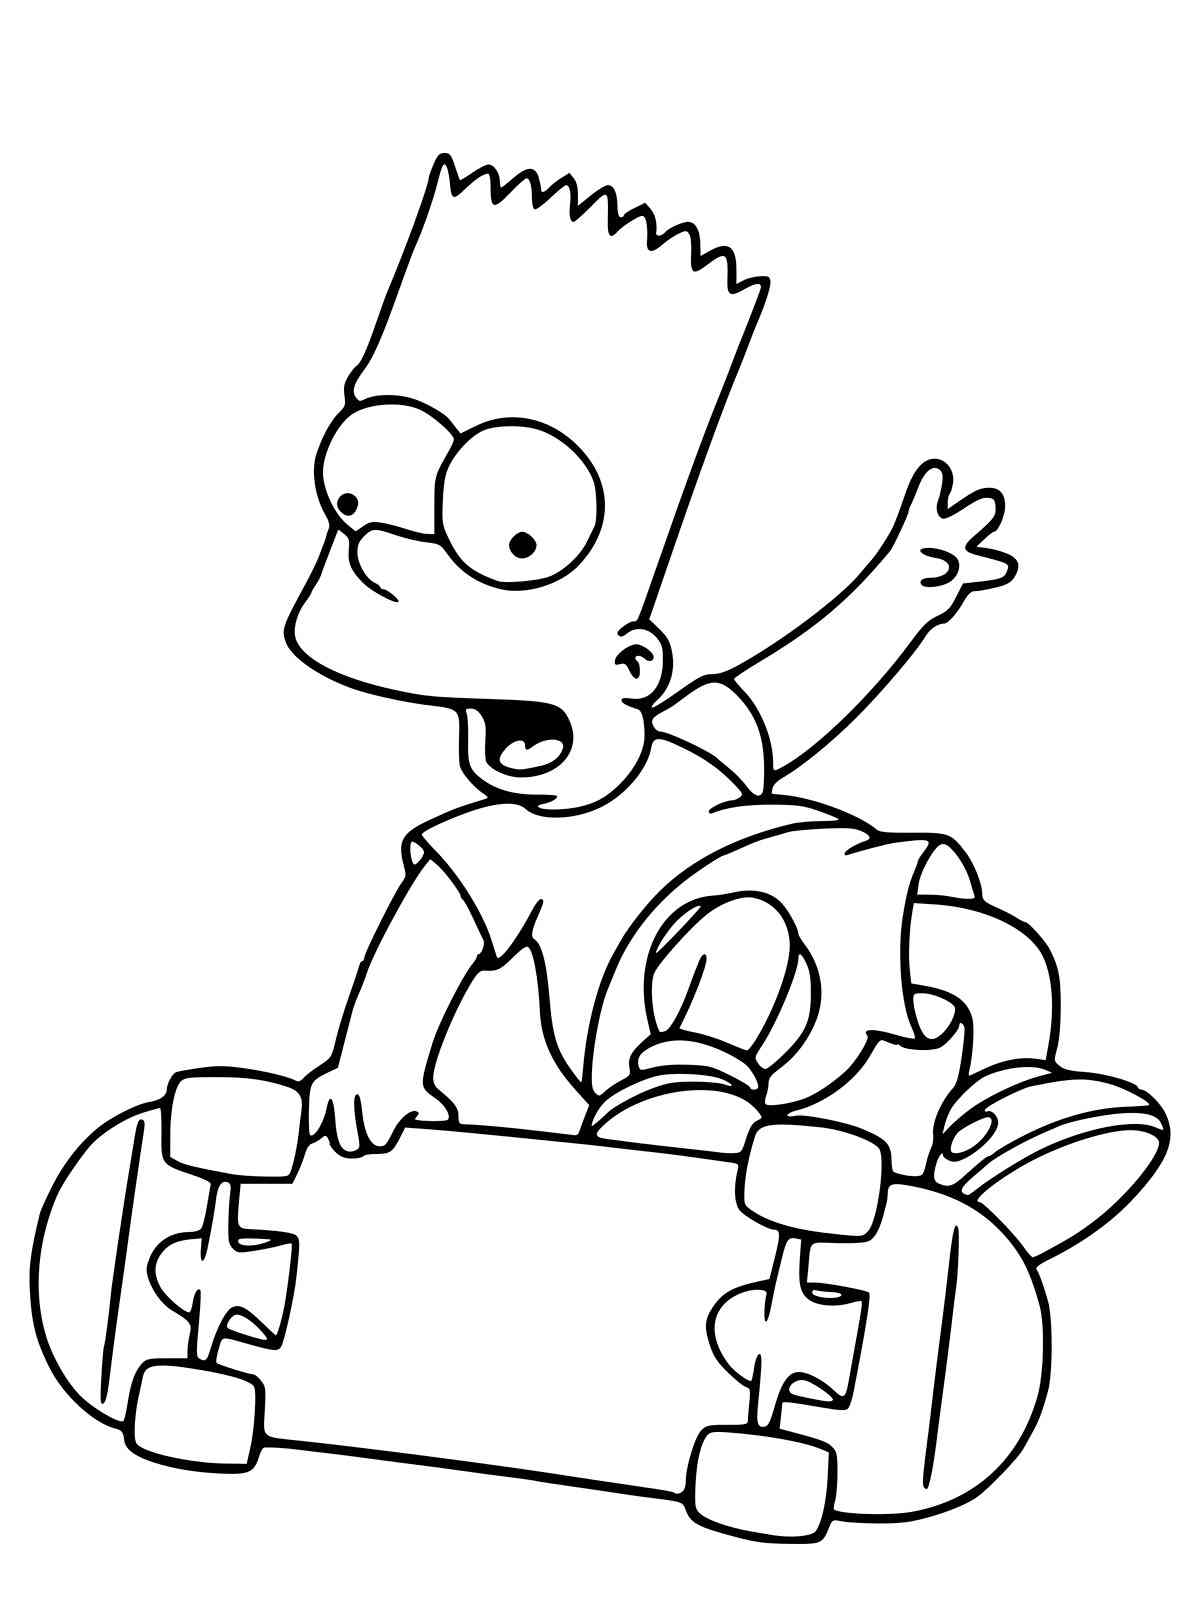 Bart Simpson on a skateboard coloring page